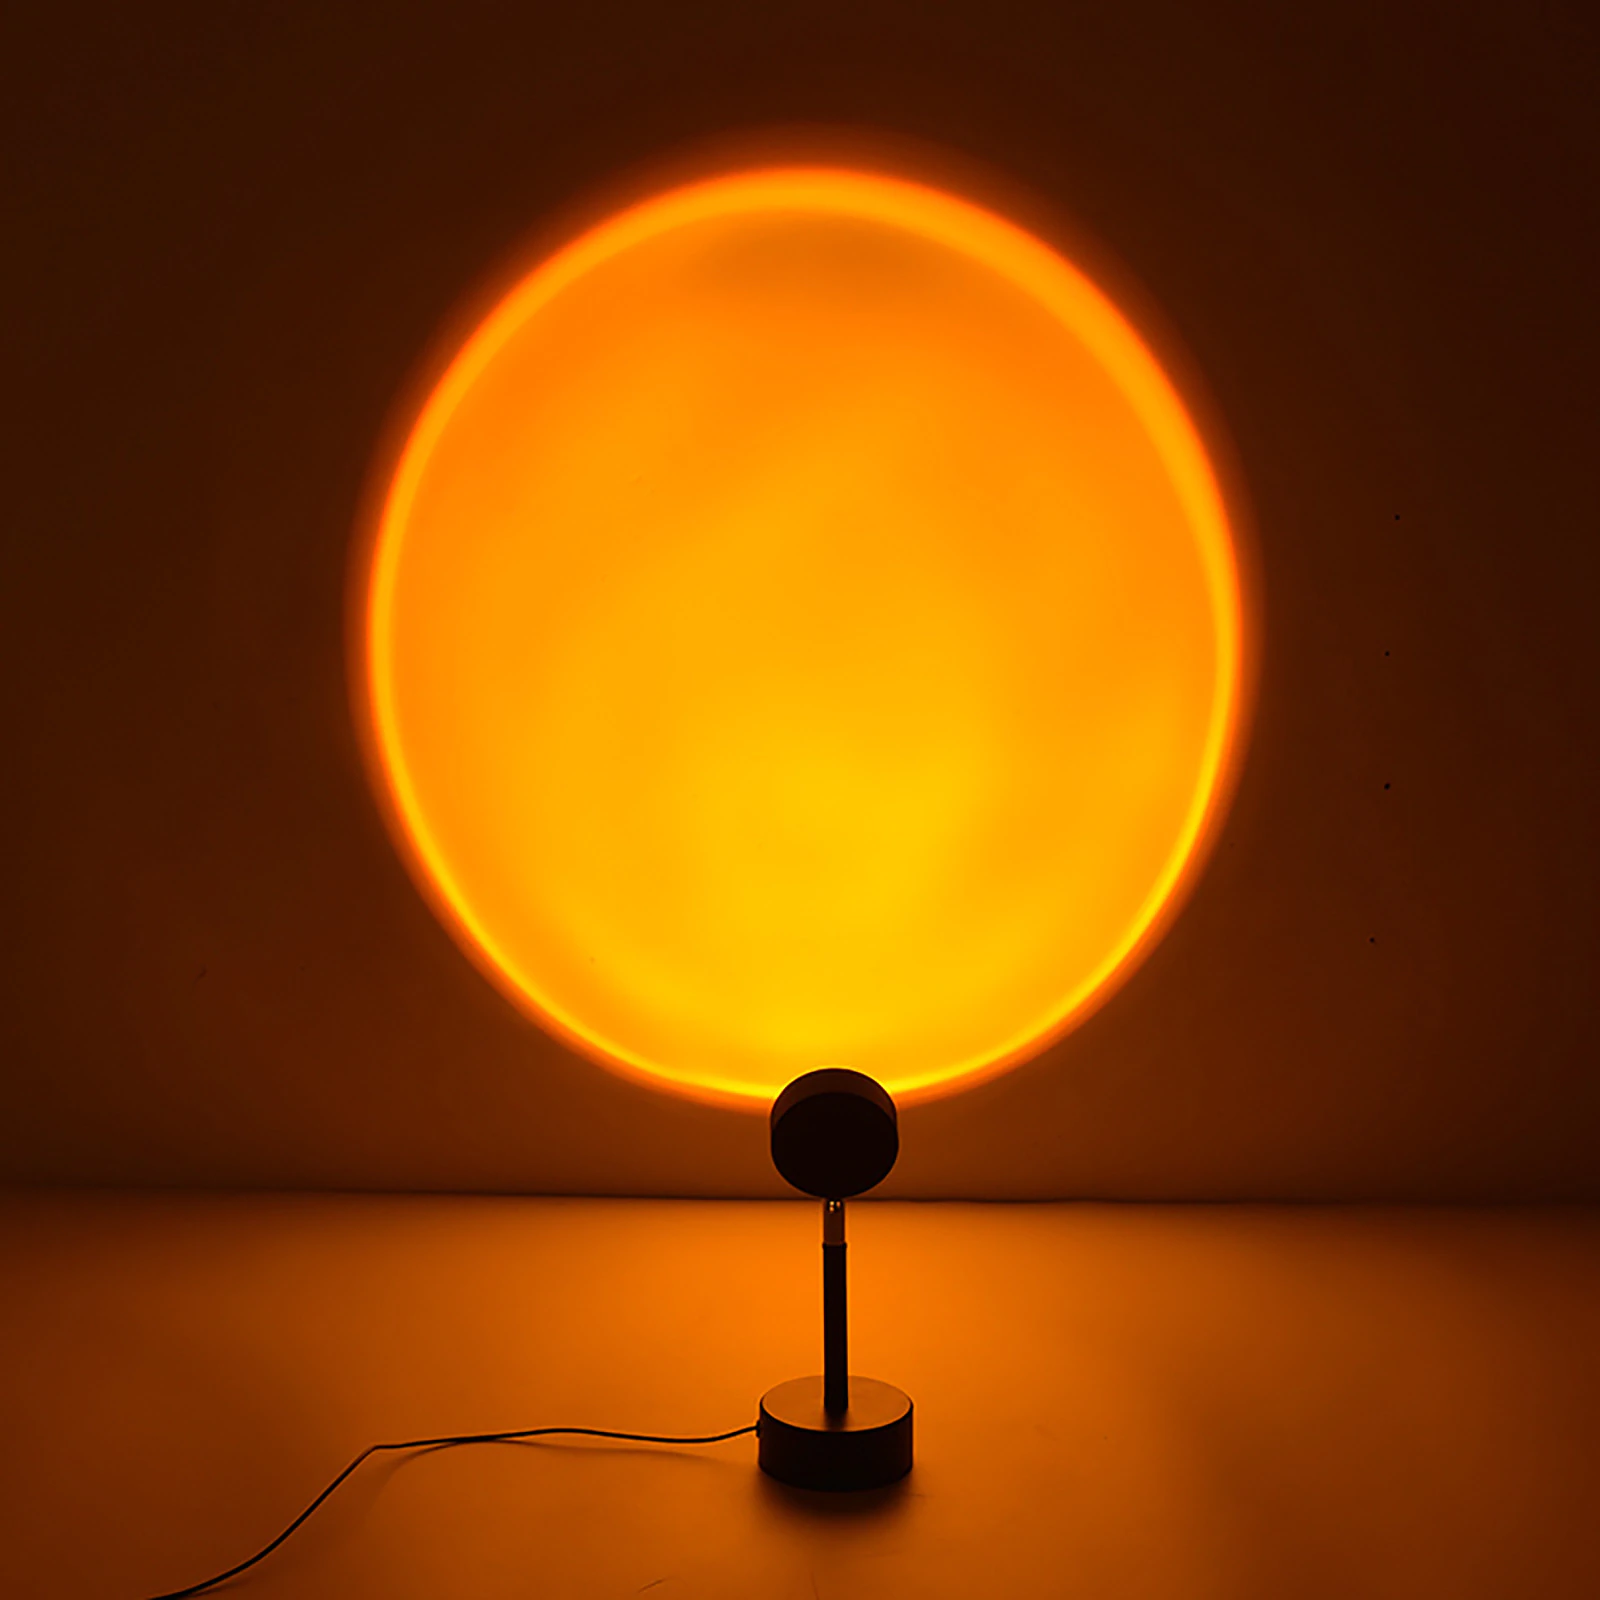 Sunset Projection Lamp with Tripod (9 Styles) USB Powered